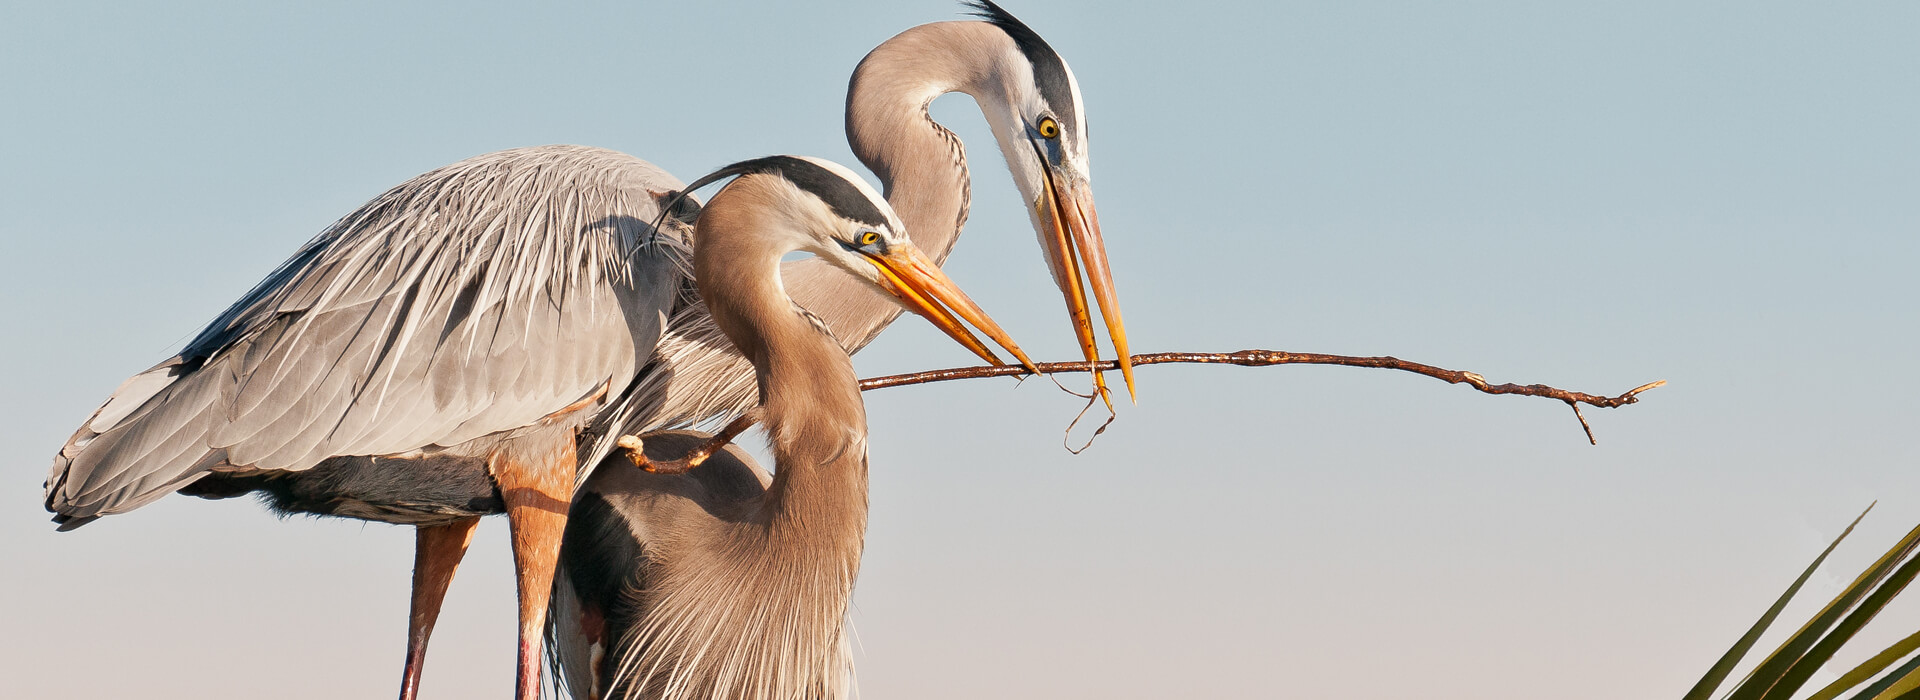 Great Blue Herons, Nagel Photography/Shutterstock